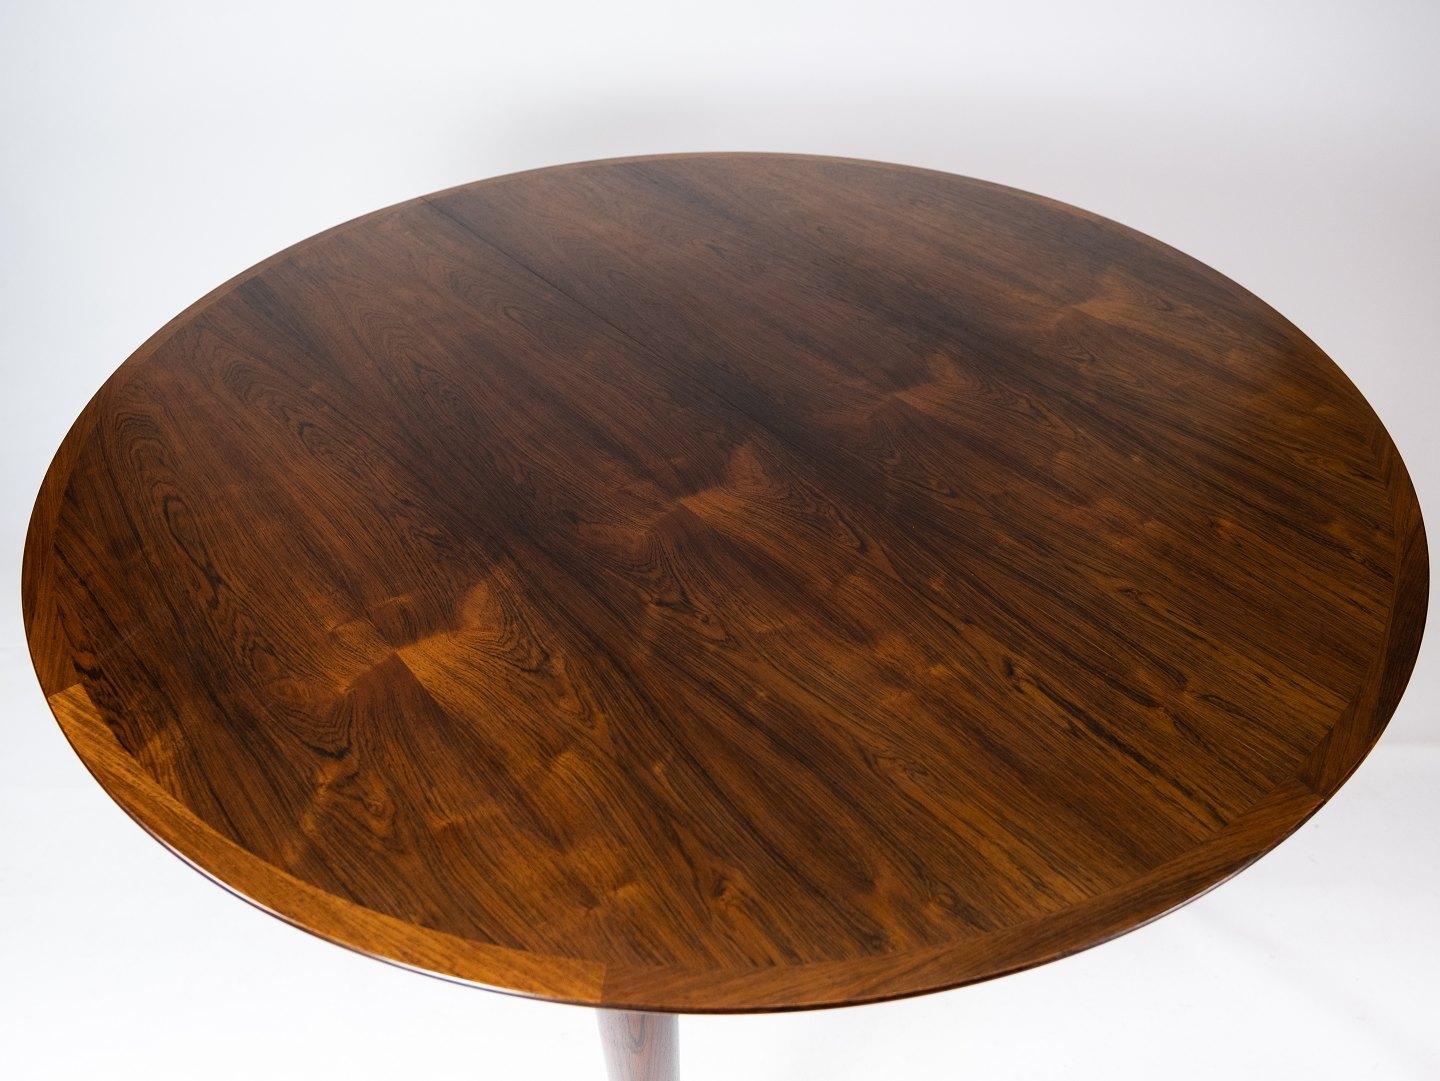 Scandinavian Modern Dining Table in Rosewood of Designed by Arne Vodder from the 1960s For Sale